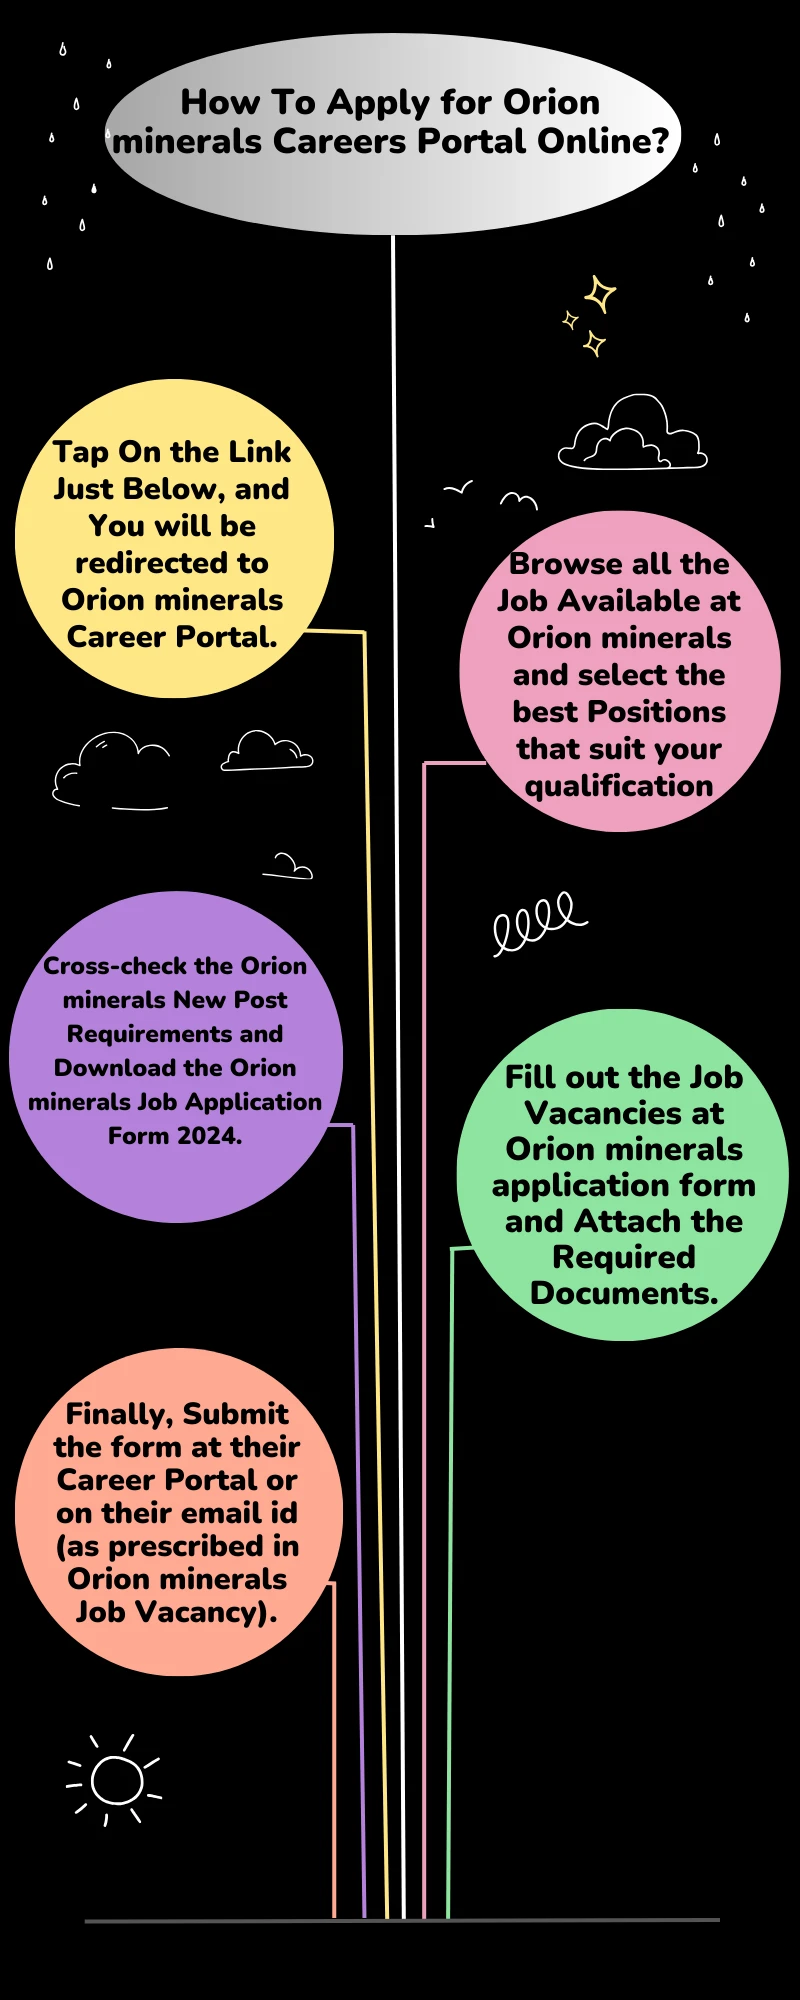 How To Apply for Orion minerals Careers Portal Online